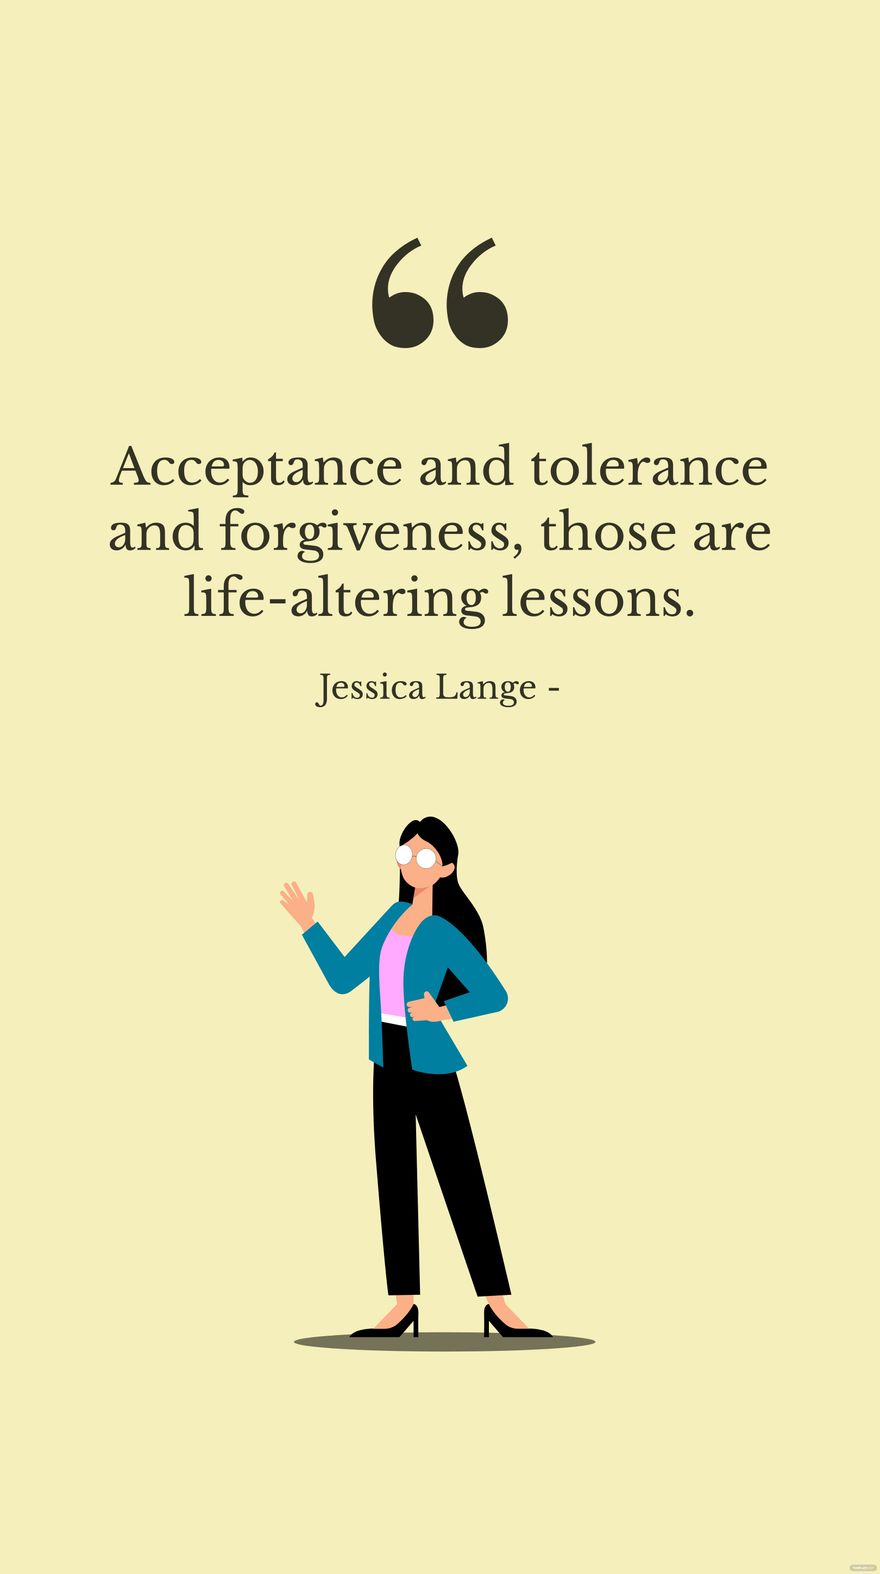 Jessica Lange - Acceptance and tolerance and forgiveness, those are life-altering lessons. in JPG